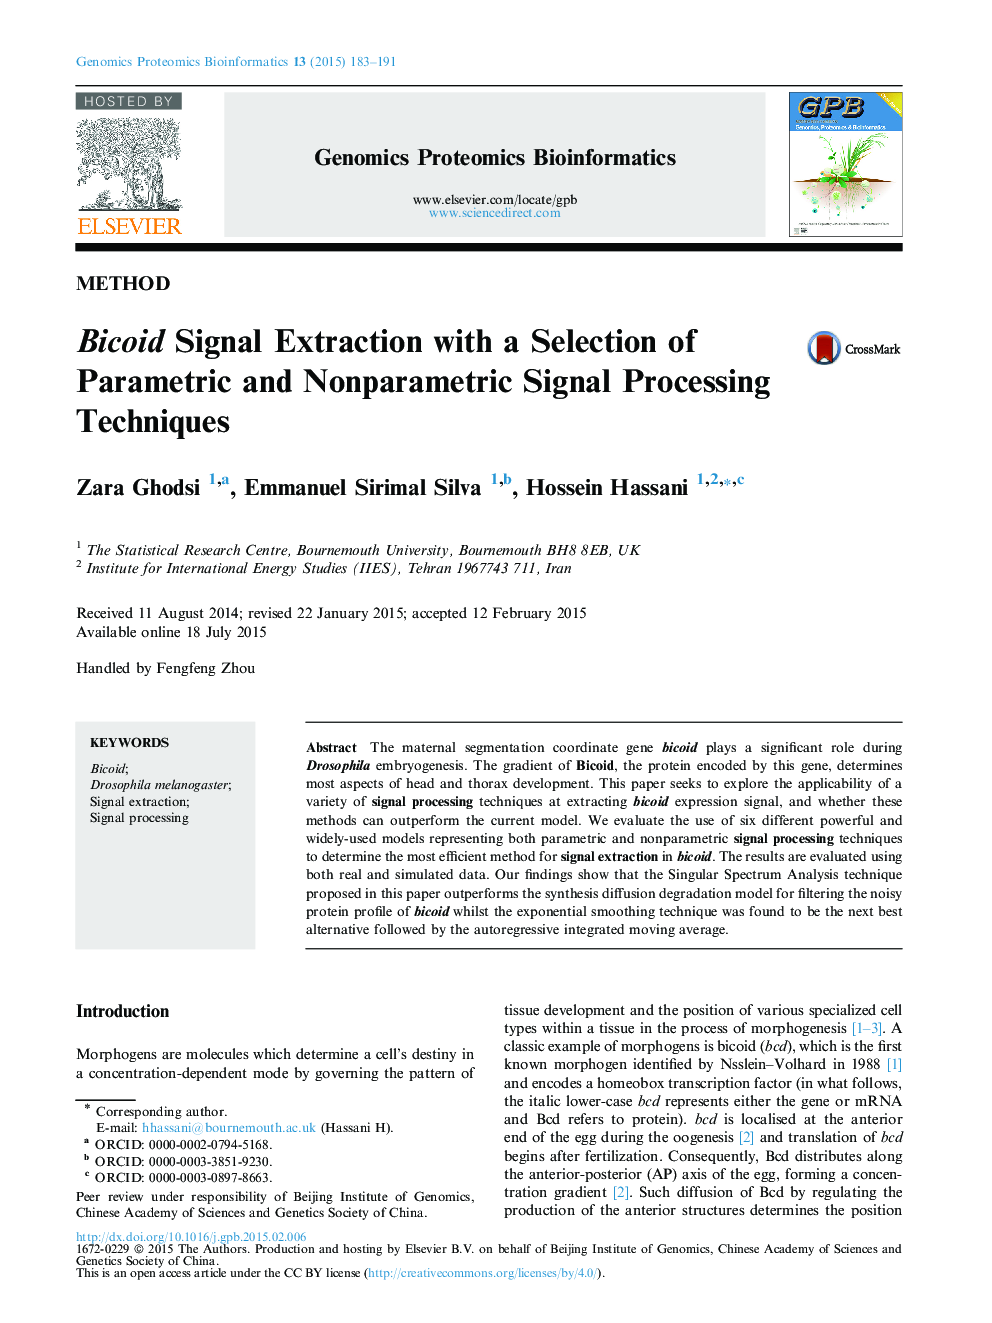 Bicoid Signal Extraction with a Selection of Parametric and Nonparametric Signal Processing Techniques 